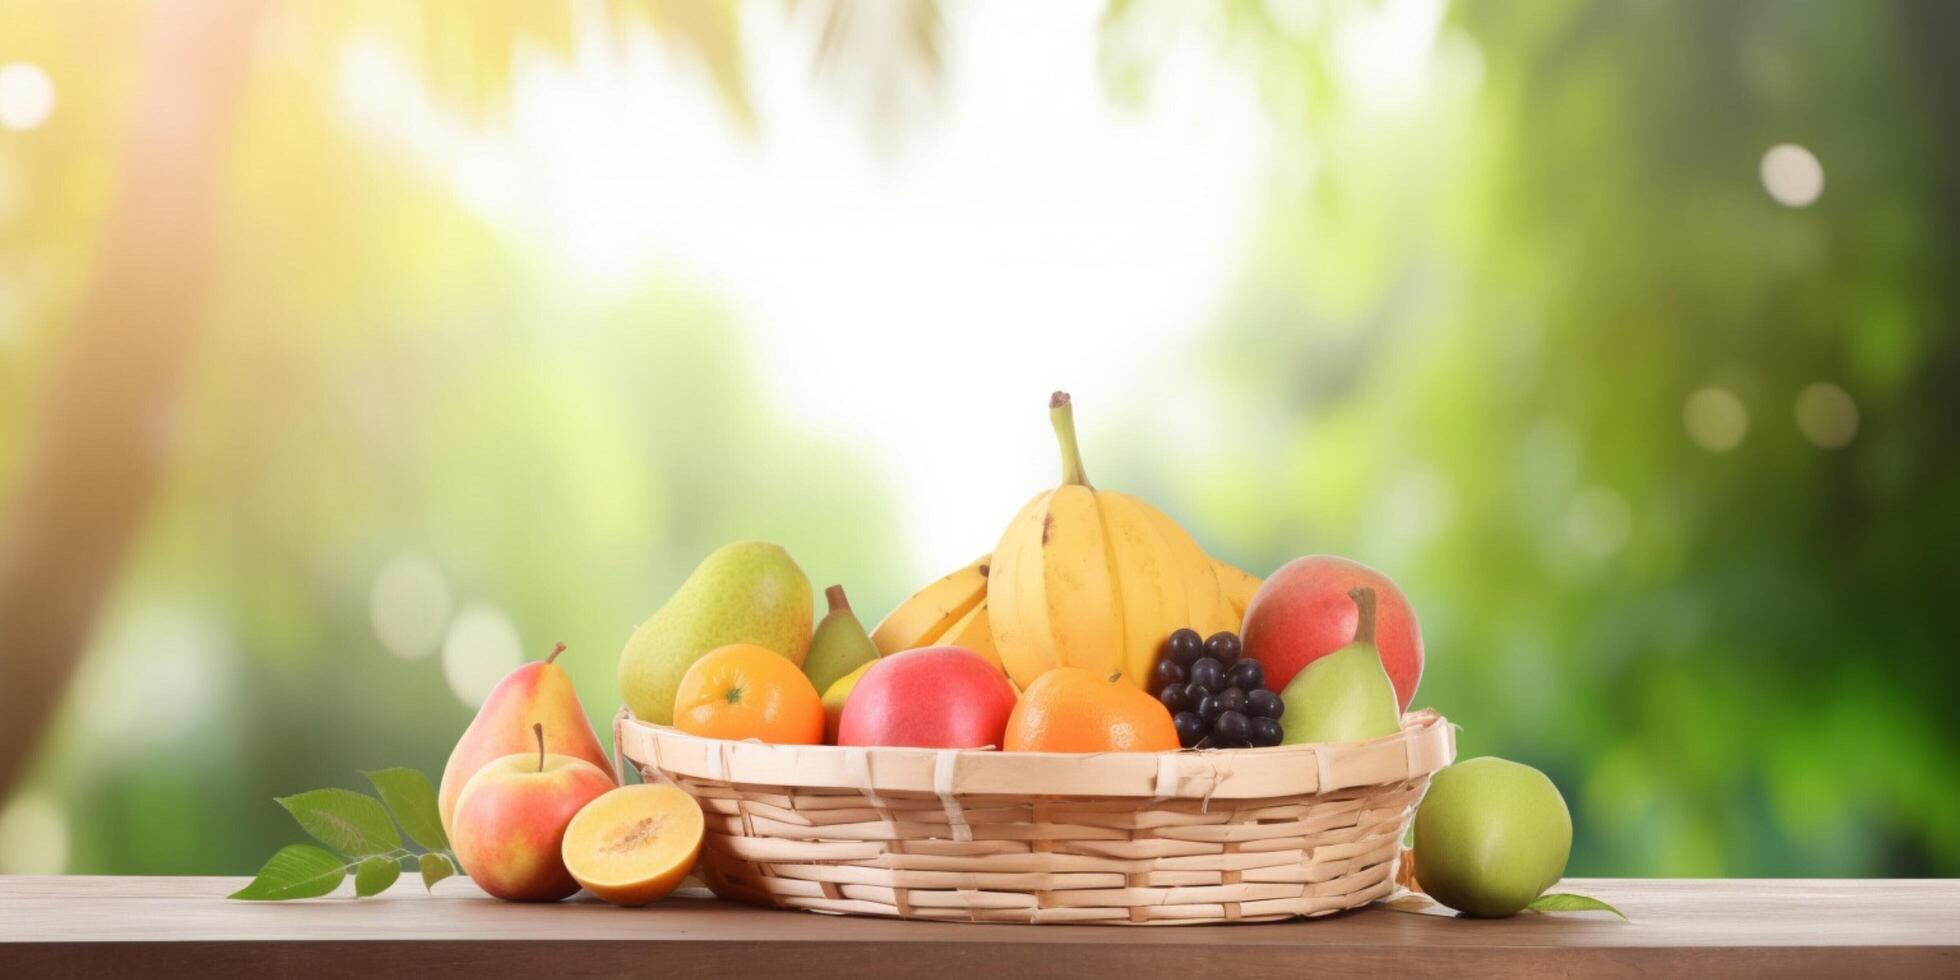 Fruits basket on a wooden table with blur jungle background photo